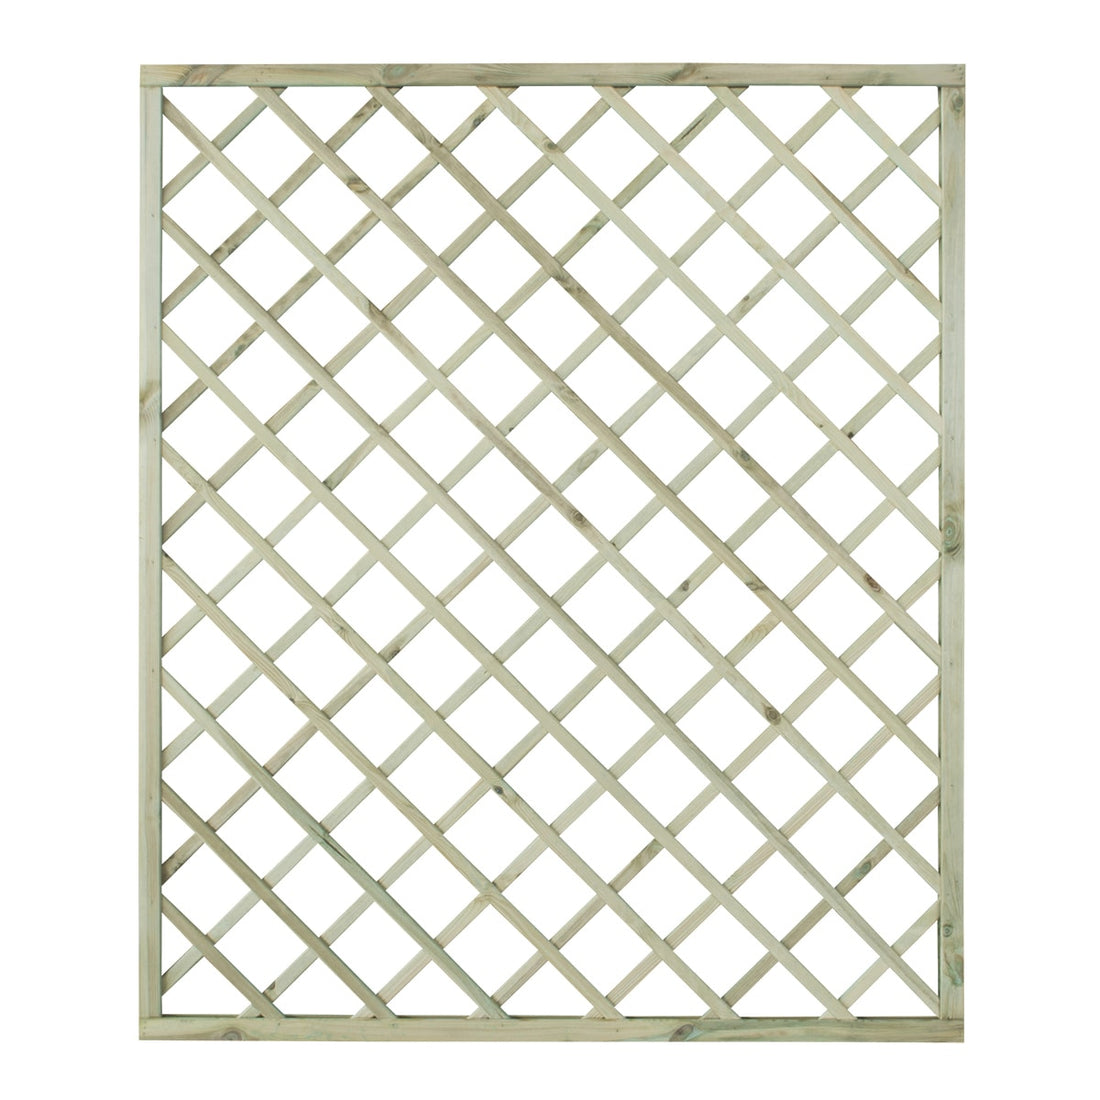 DIAGO GRATING 150 X 180 CM IN AUTOCLAVE-TREATED PINE WOOD